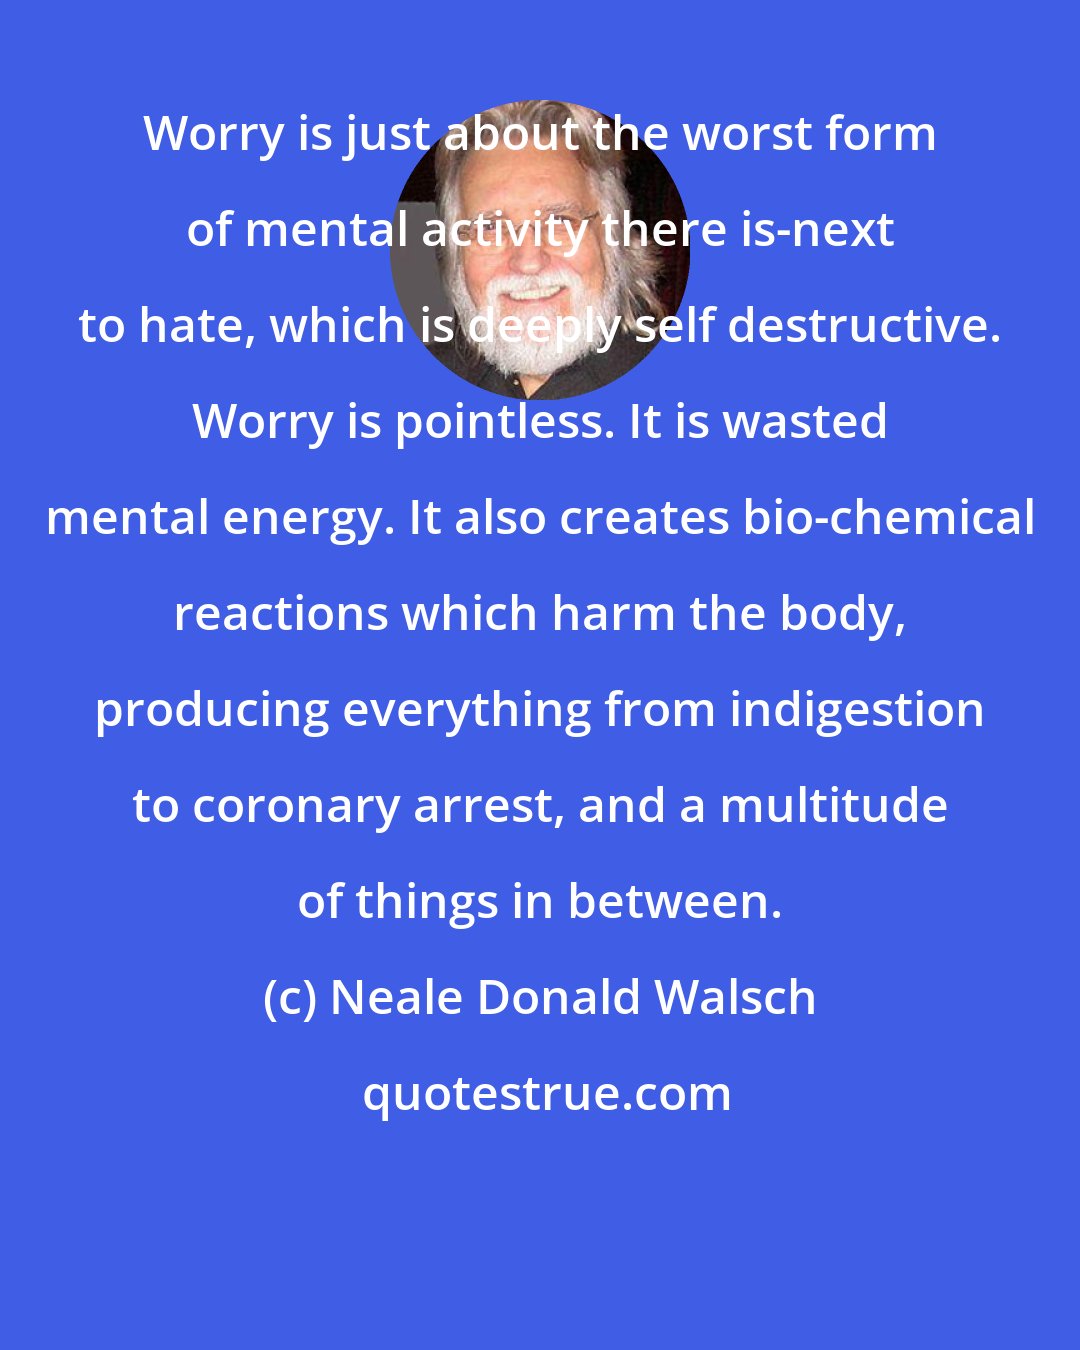 Neale Donald Walsch: Worry is just about the worst form of mental activity there is-next to hate, which is deeply self destructive. Worry is pointless. It is wasted mental energy. It also creates bio-chemical reactions which harm the body, producing everything from indigestion to coronary arrest, and a multitude of things in between.